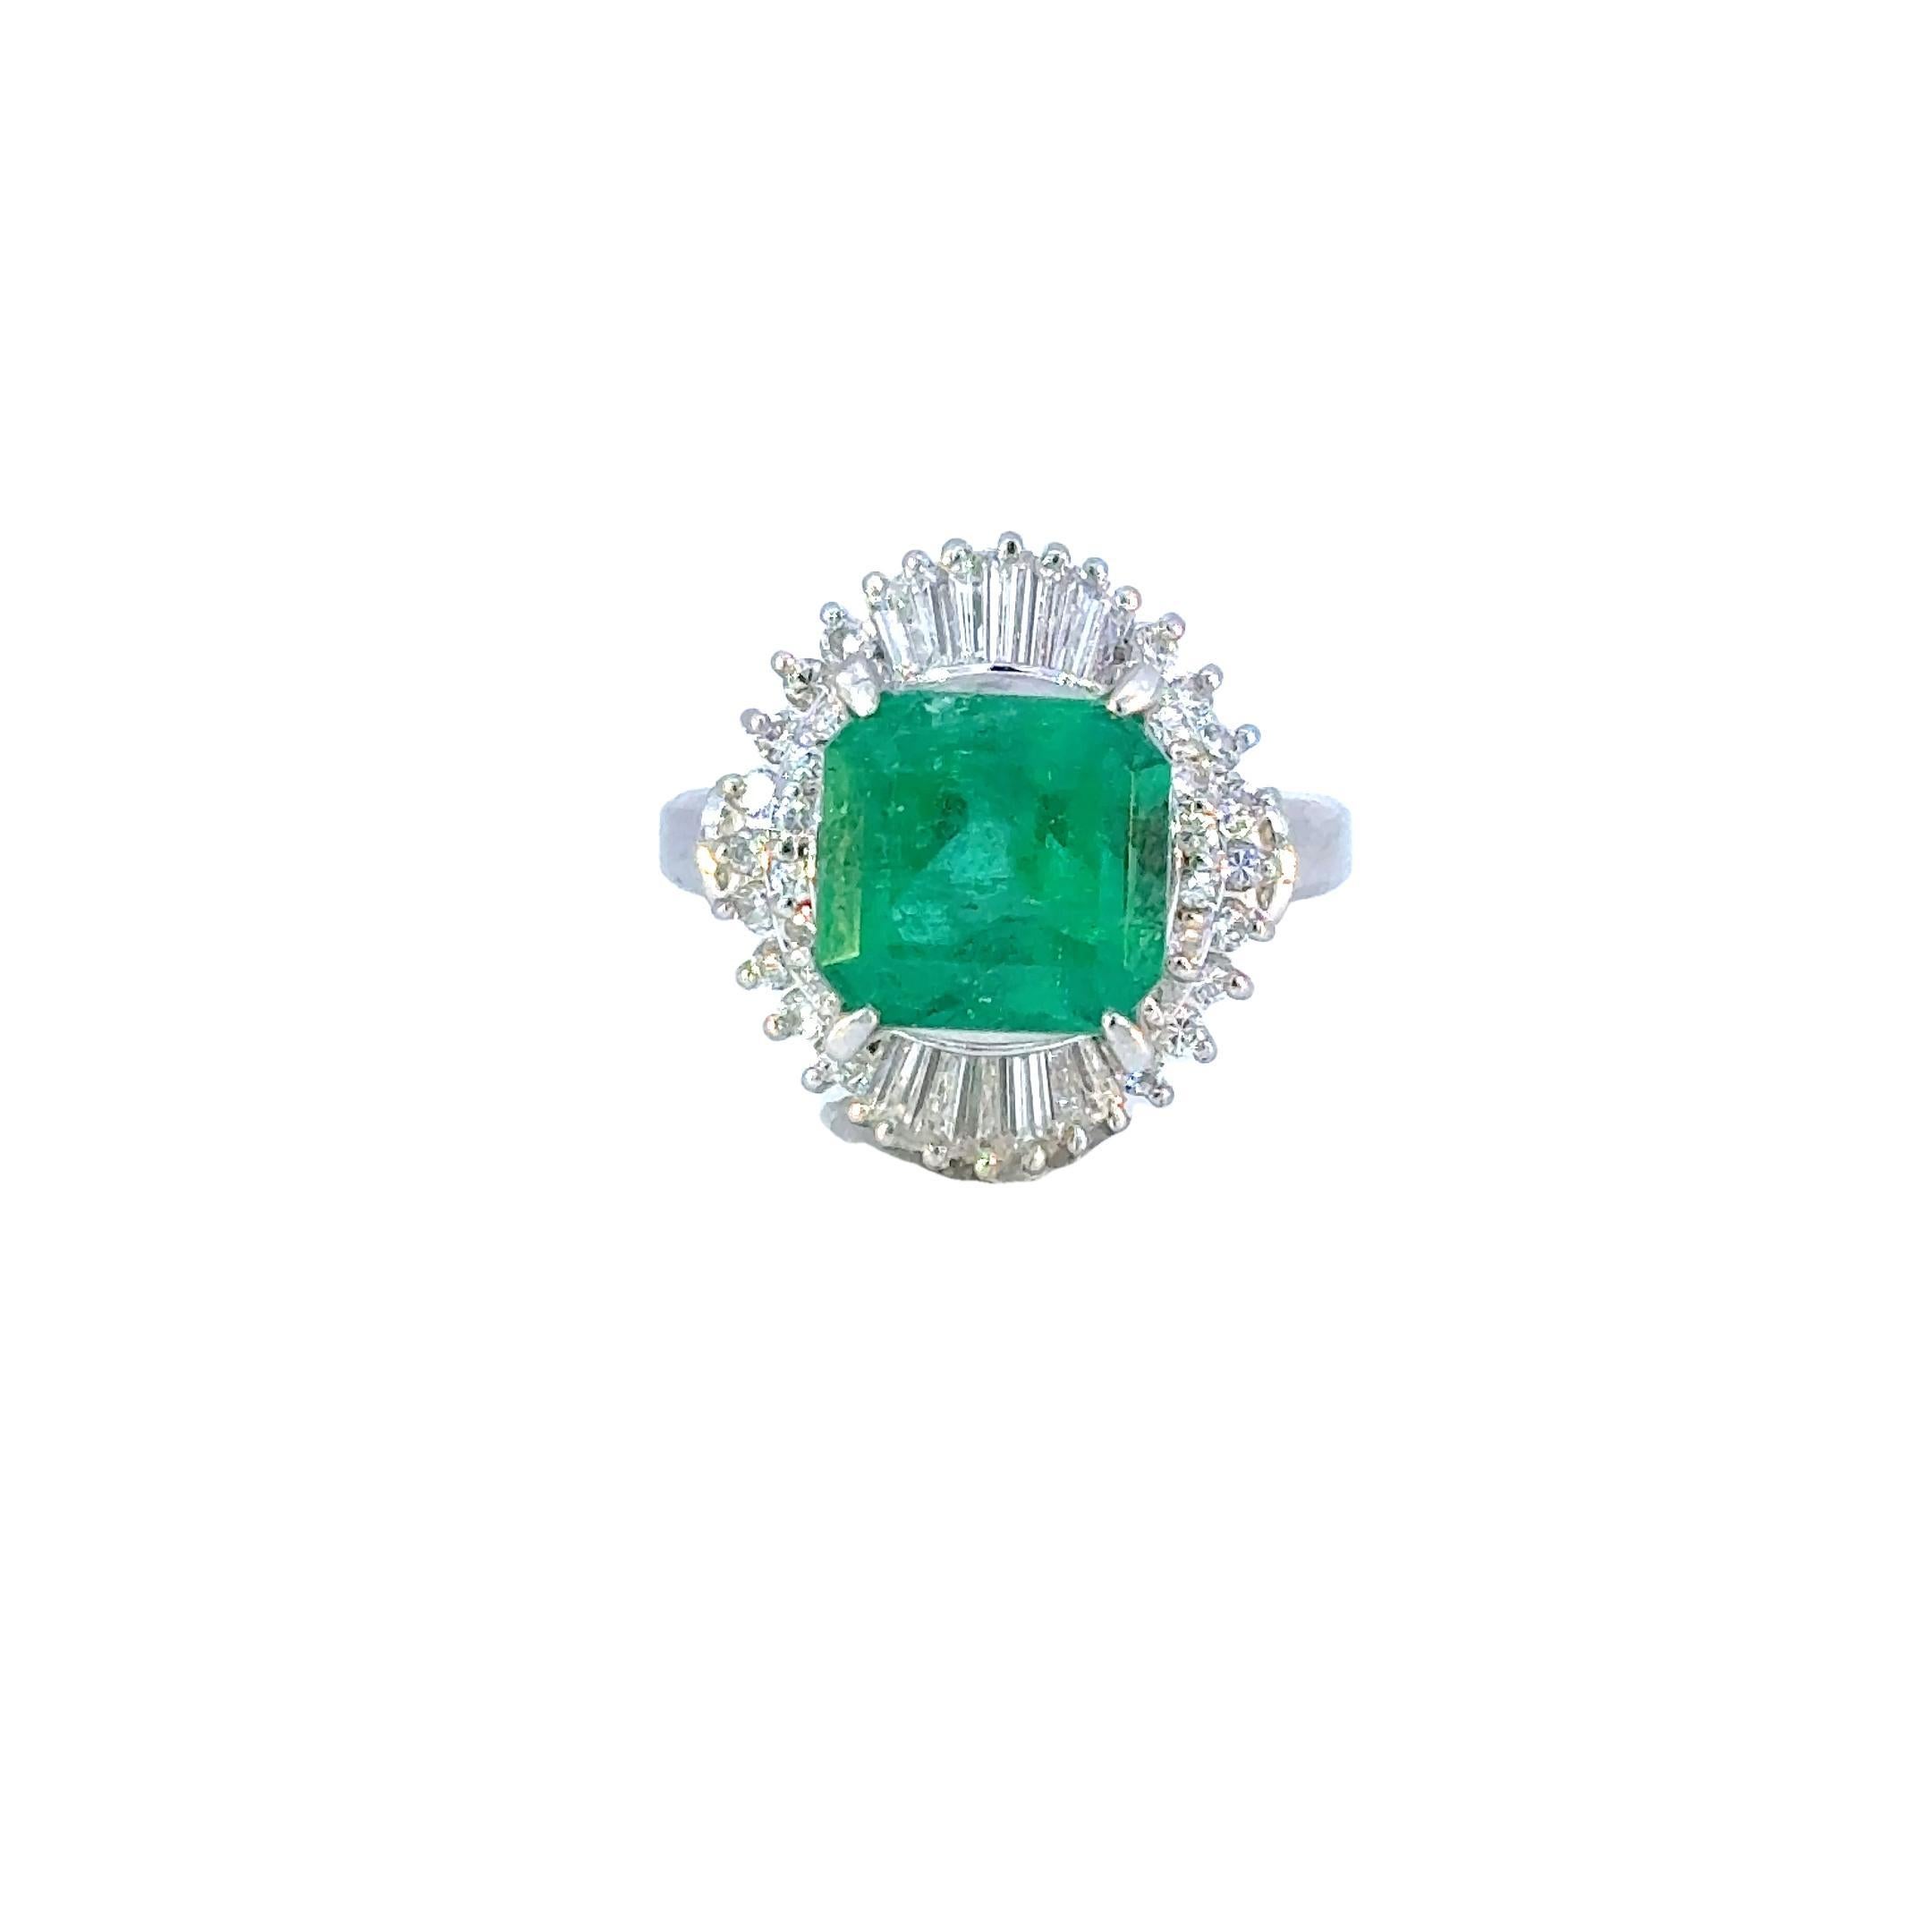 This exquisite 3.32 Carat Emerald is truly a captivating gemstone. Mined from the renowned Columbian emerald mines, this gem showcases the superior quality and rich green hue that Columbian emeralds are renowned for. The vibrant color of this